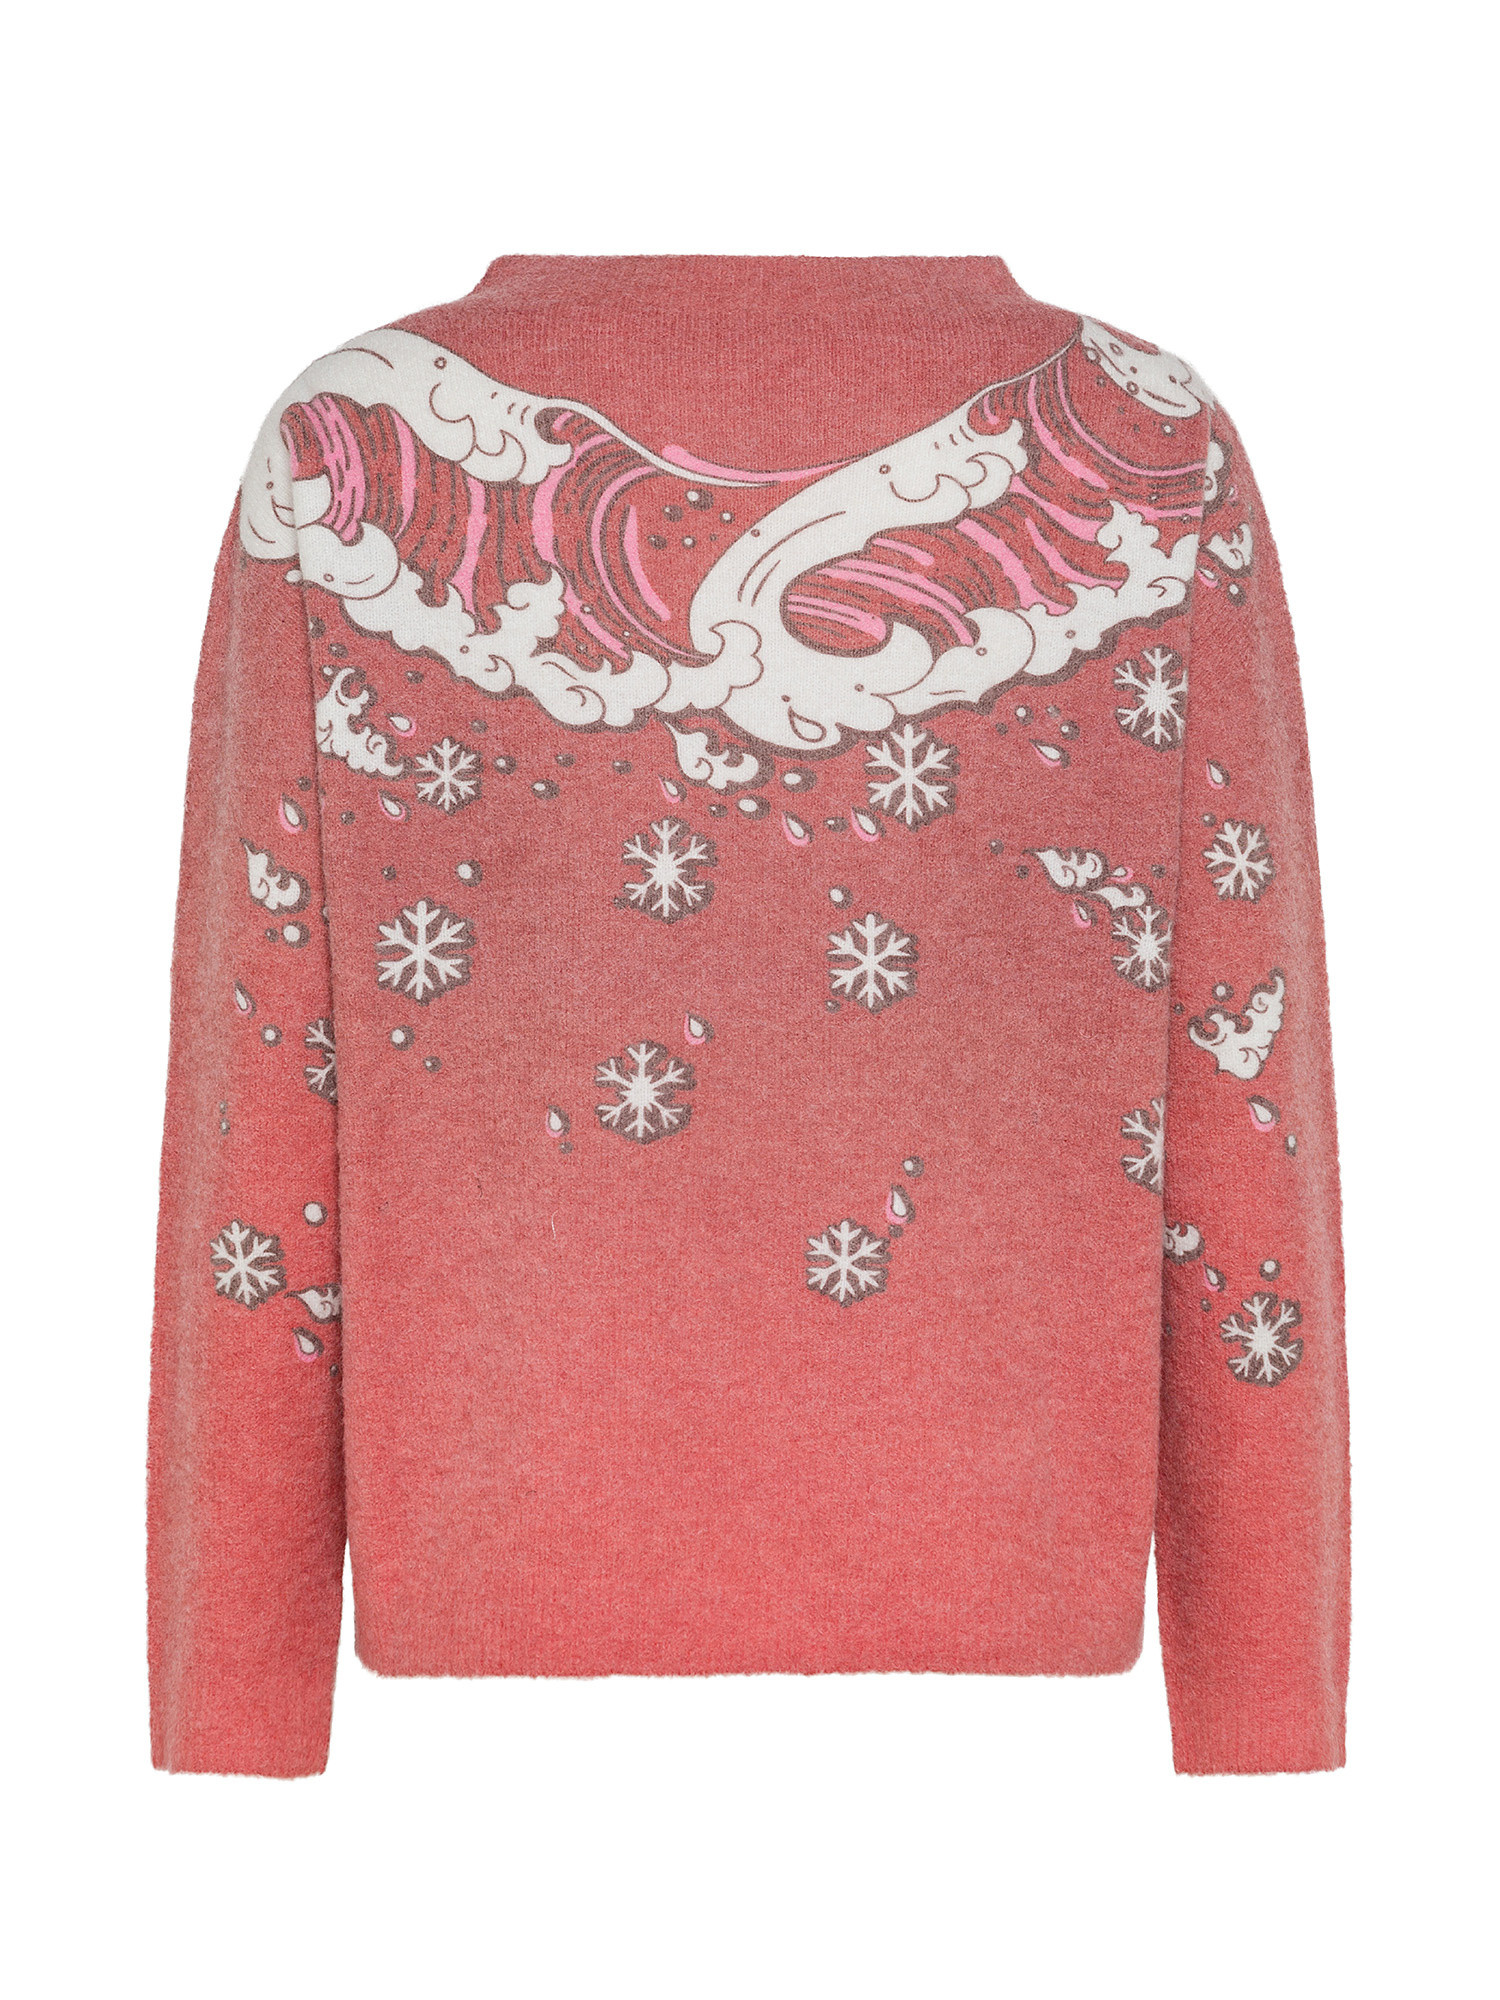 The Surfer's Christmas sweater by Paula Cademartori, Red, large image number 1